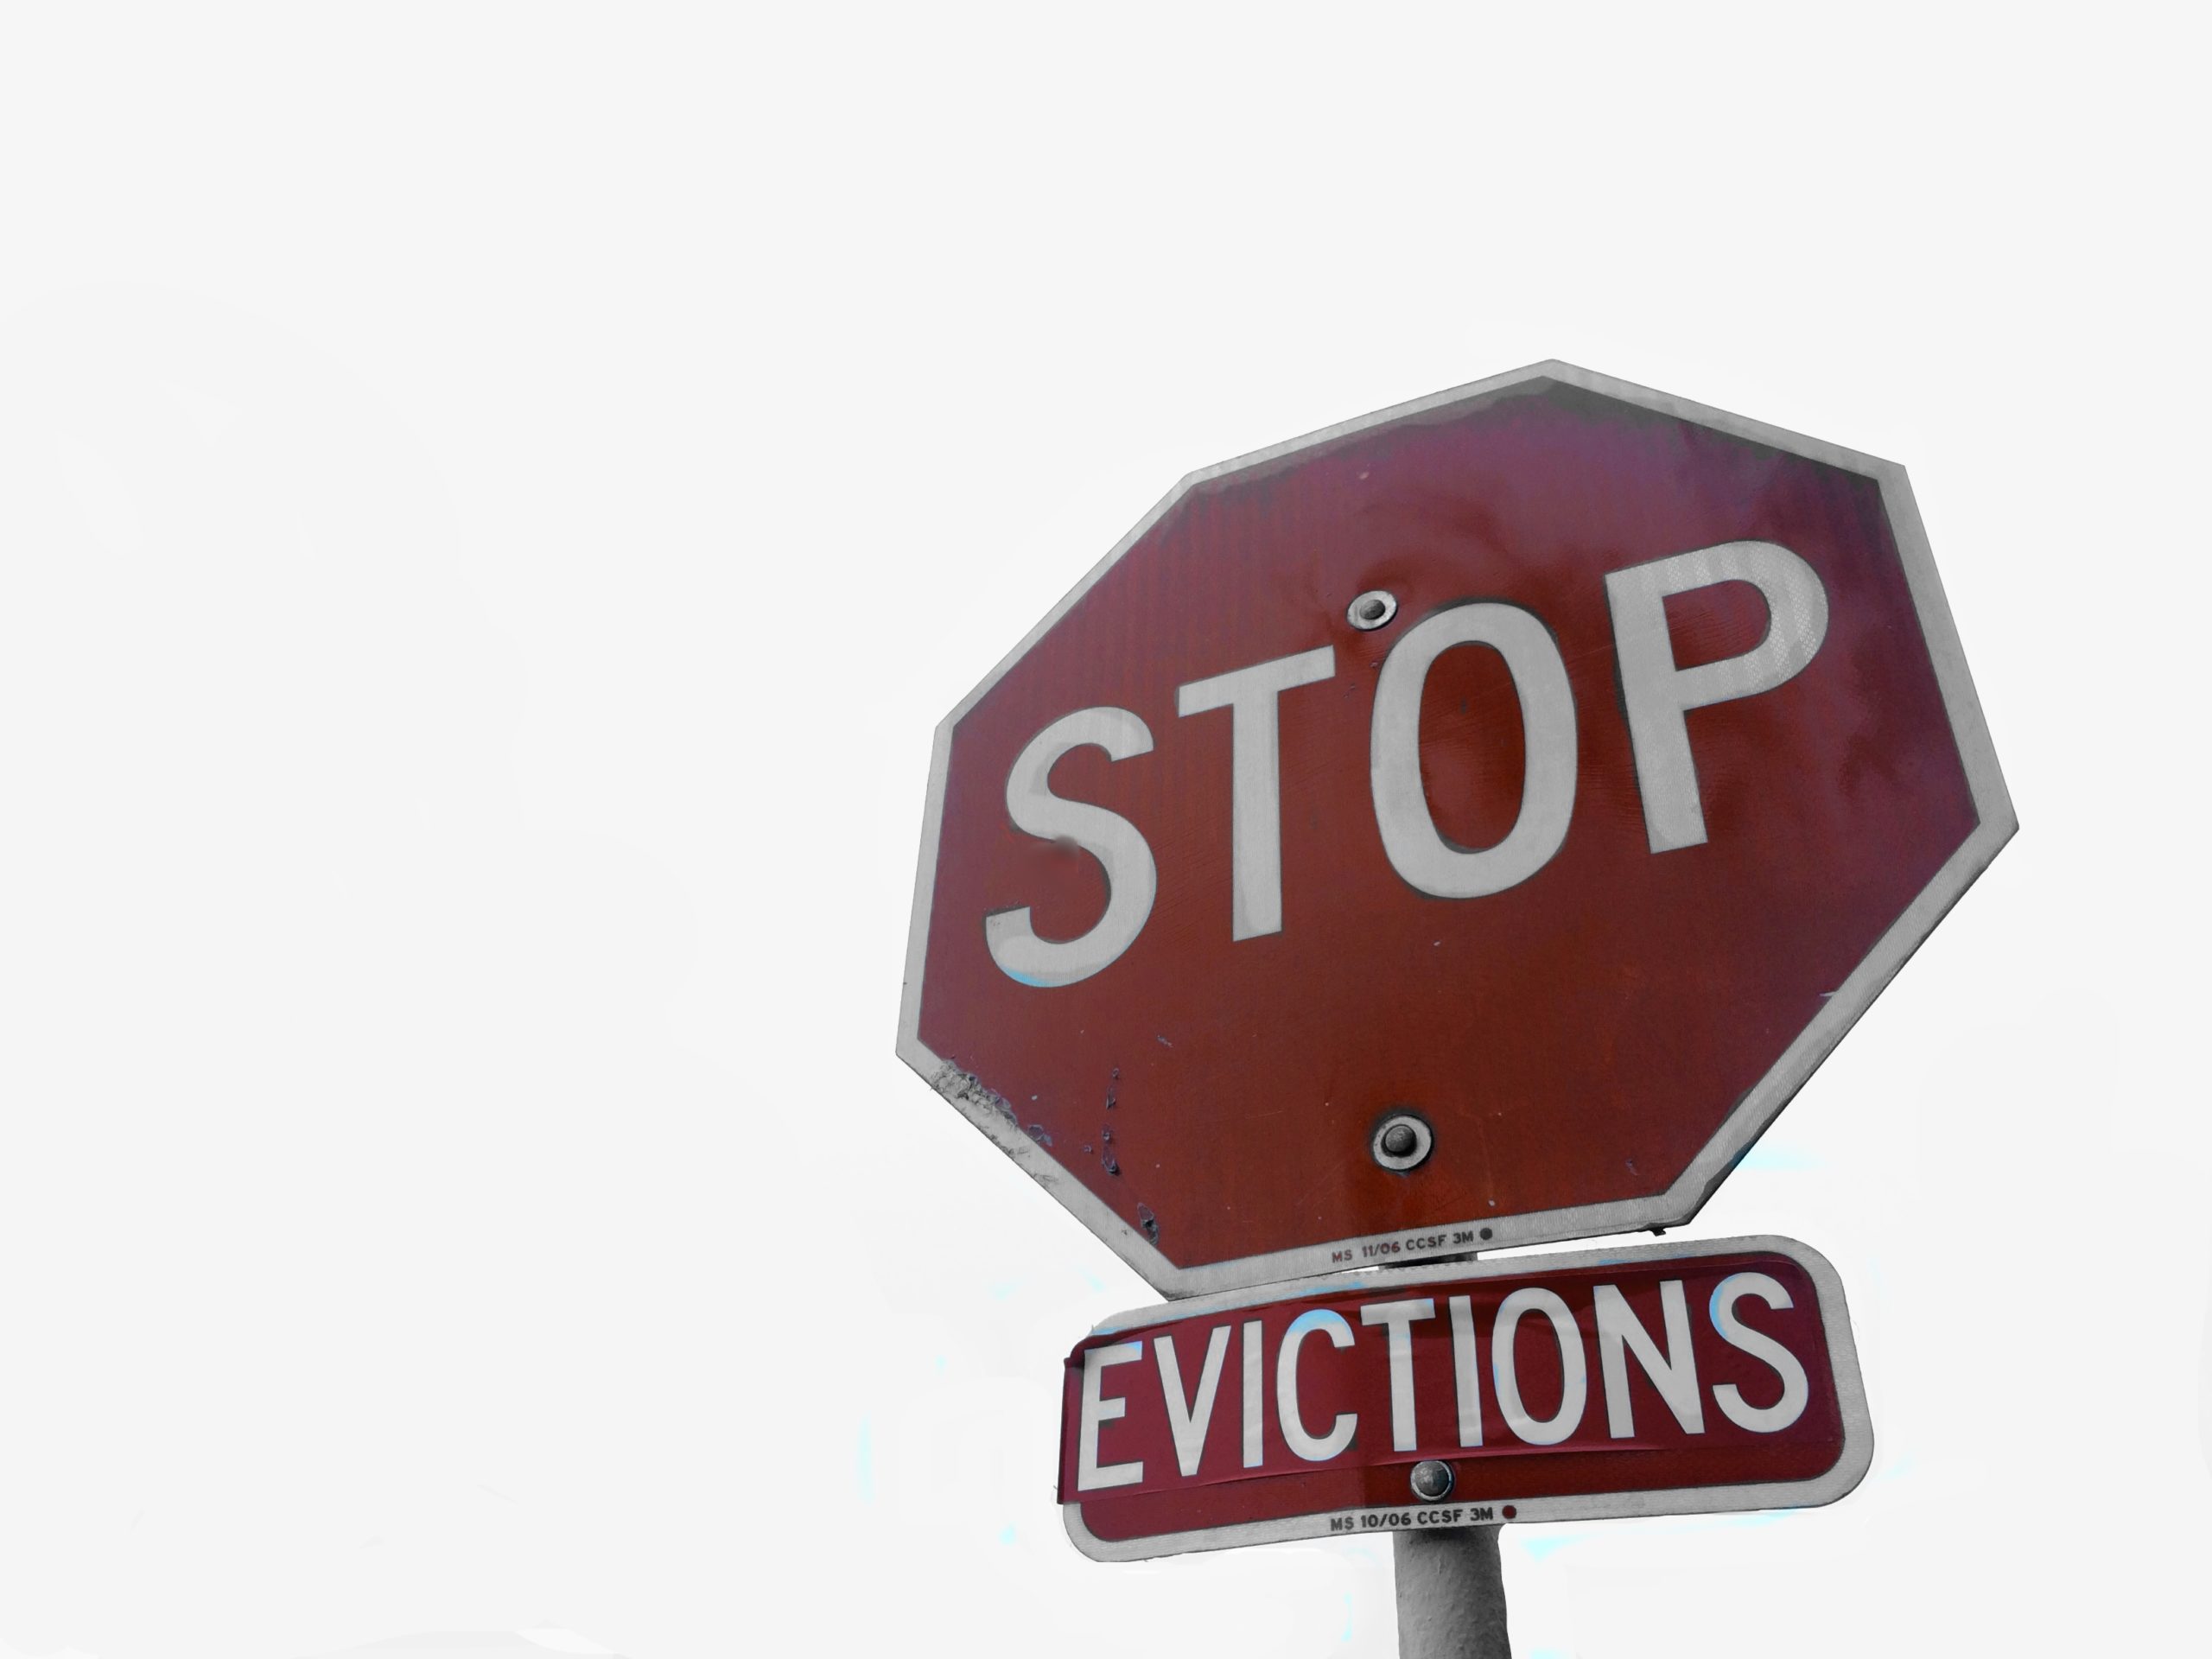 A stop sign with an added sign below it that reads "Colorado eviction," against a blank background, highlighting the ongoing rental crisis.